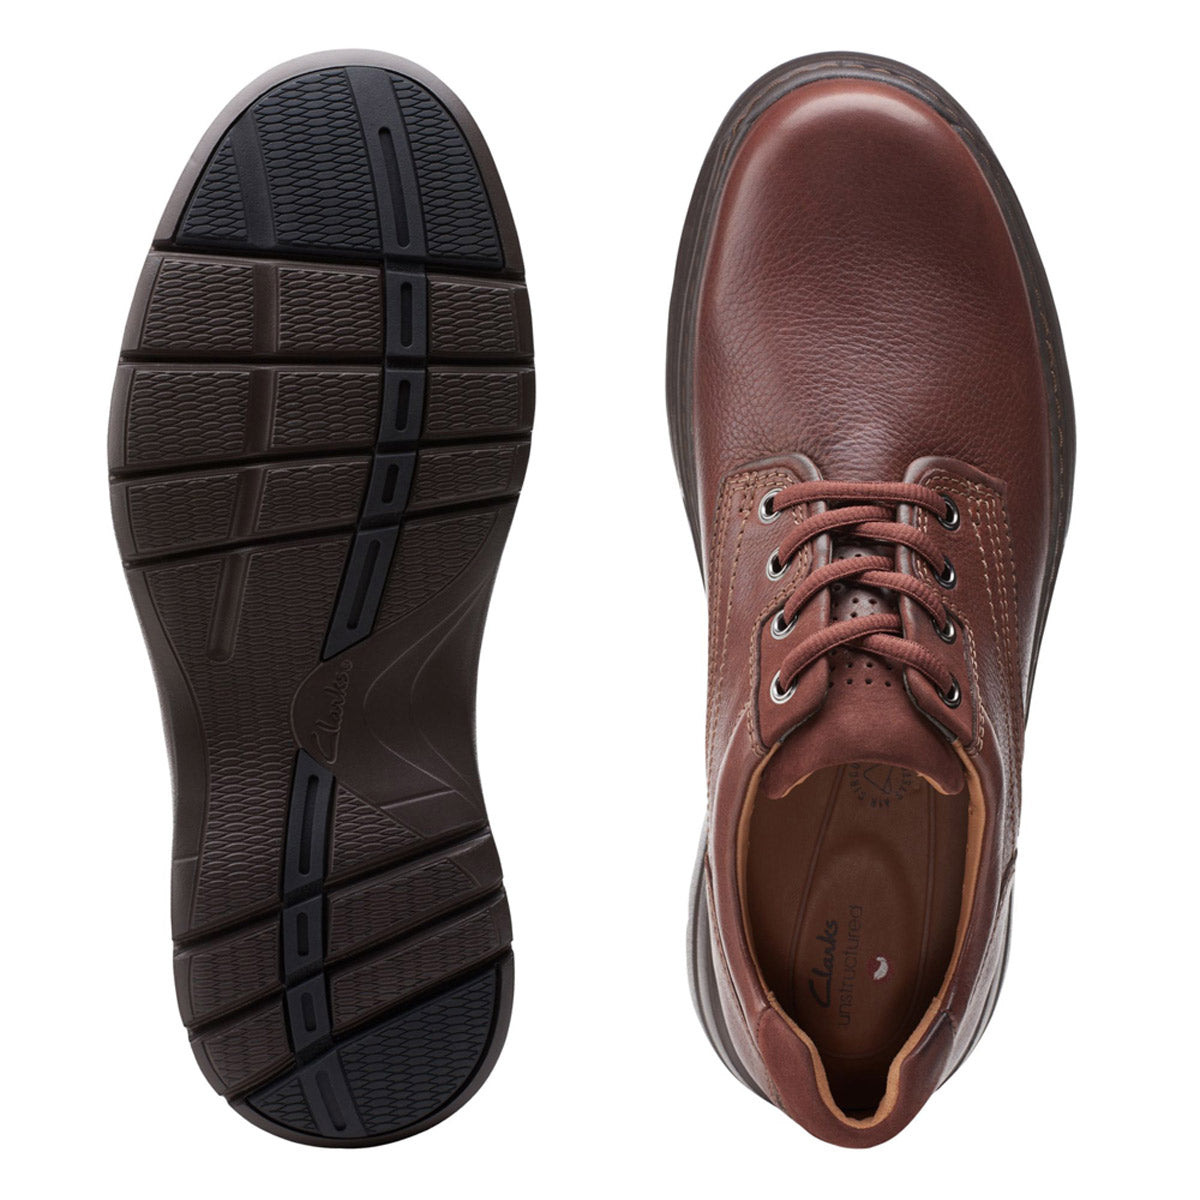 A pair of Clarks Un Brawley Pace mahogany full-grain leather dress shoes with laces, shown from above and sole view.